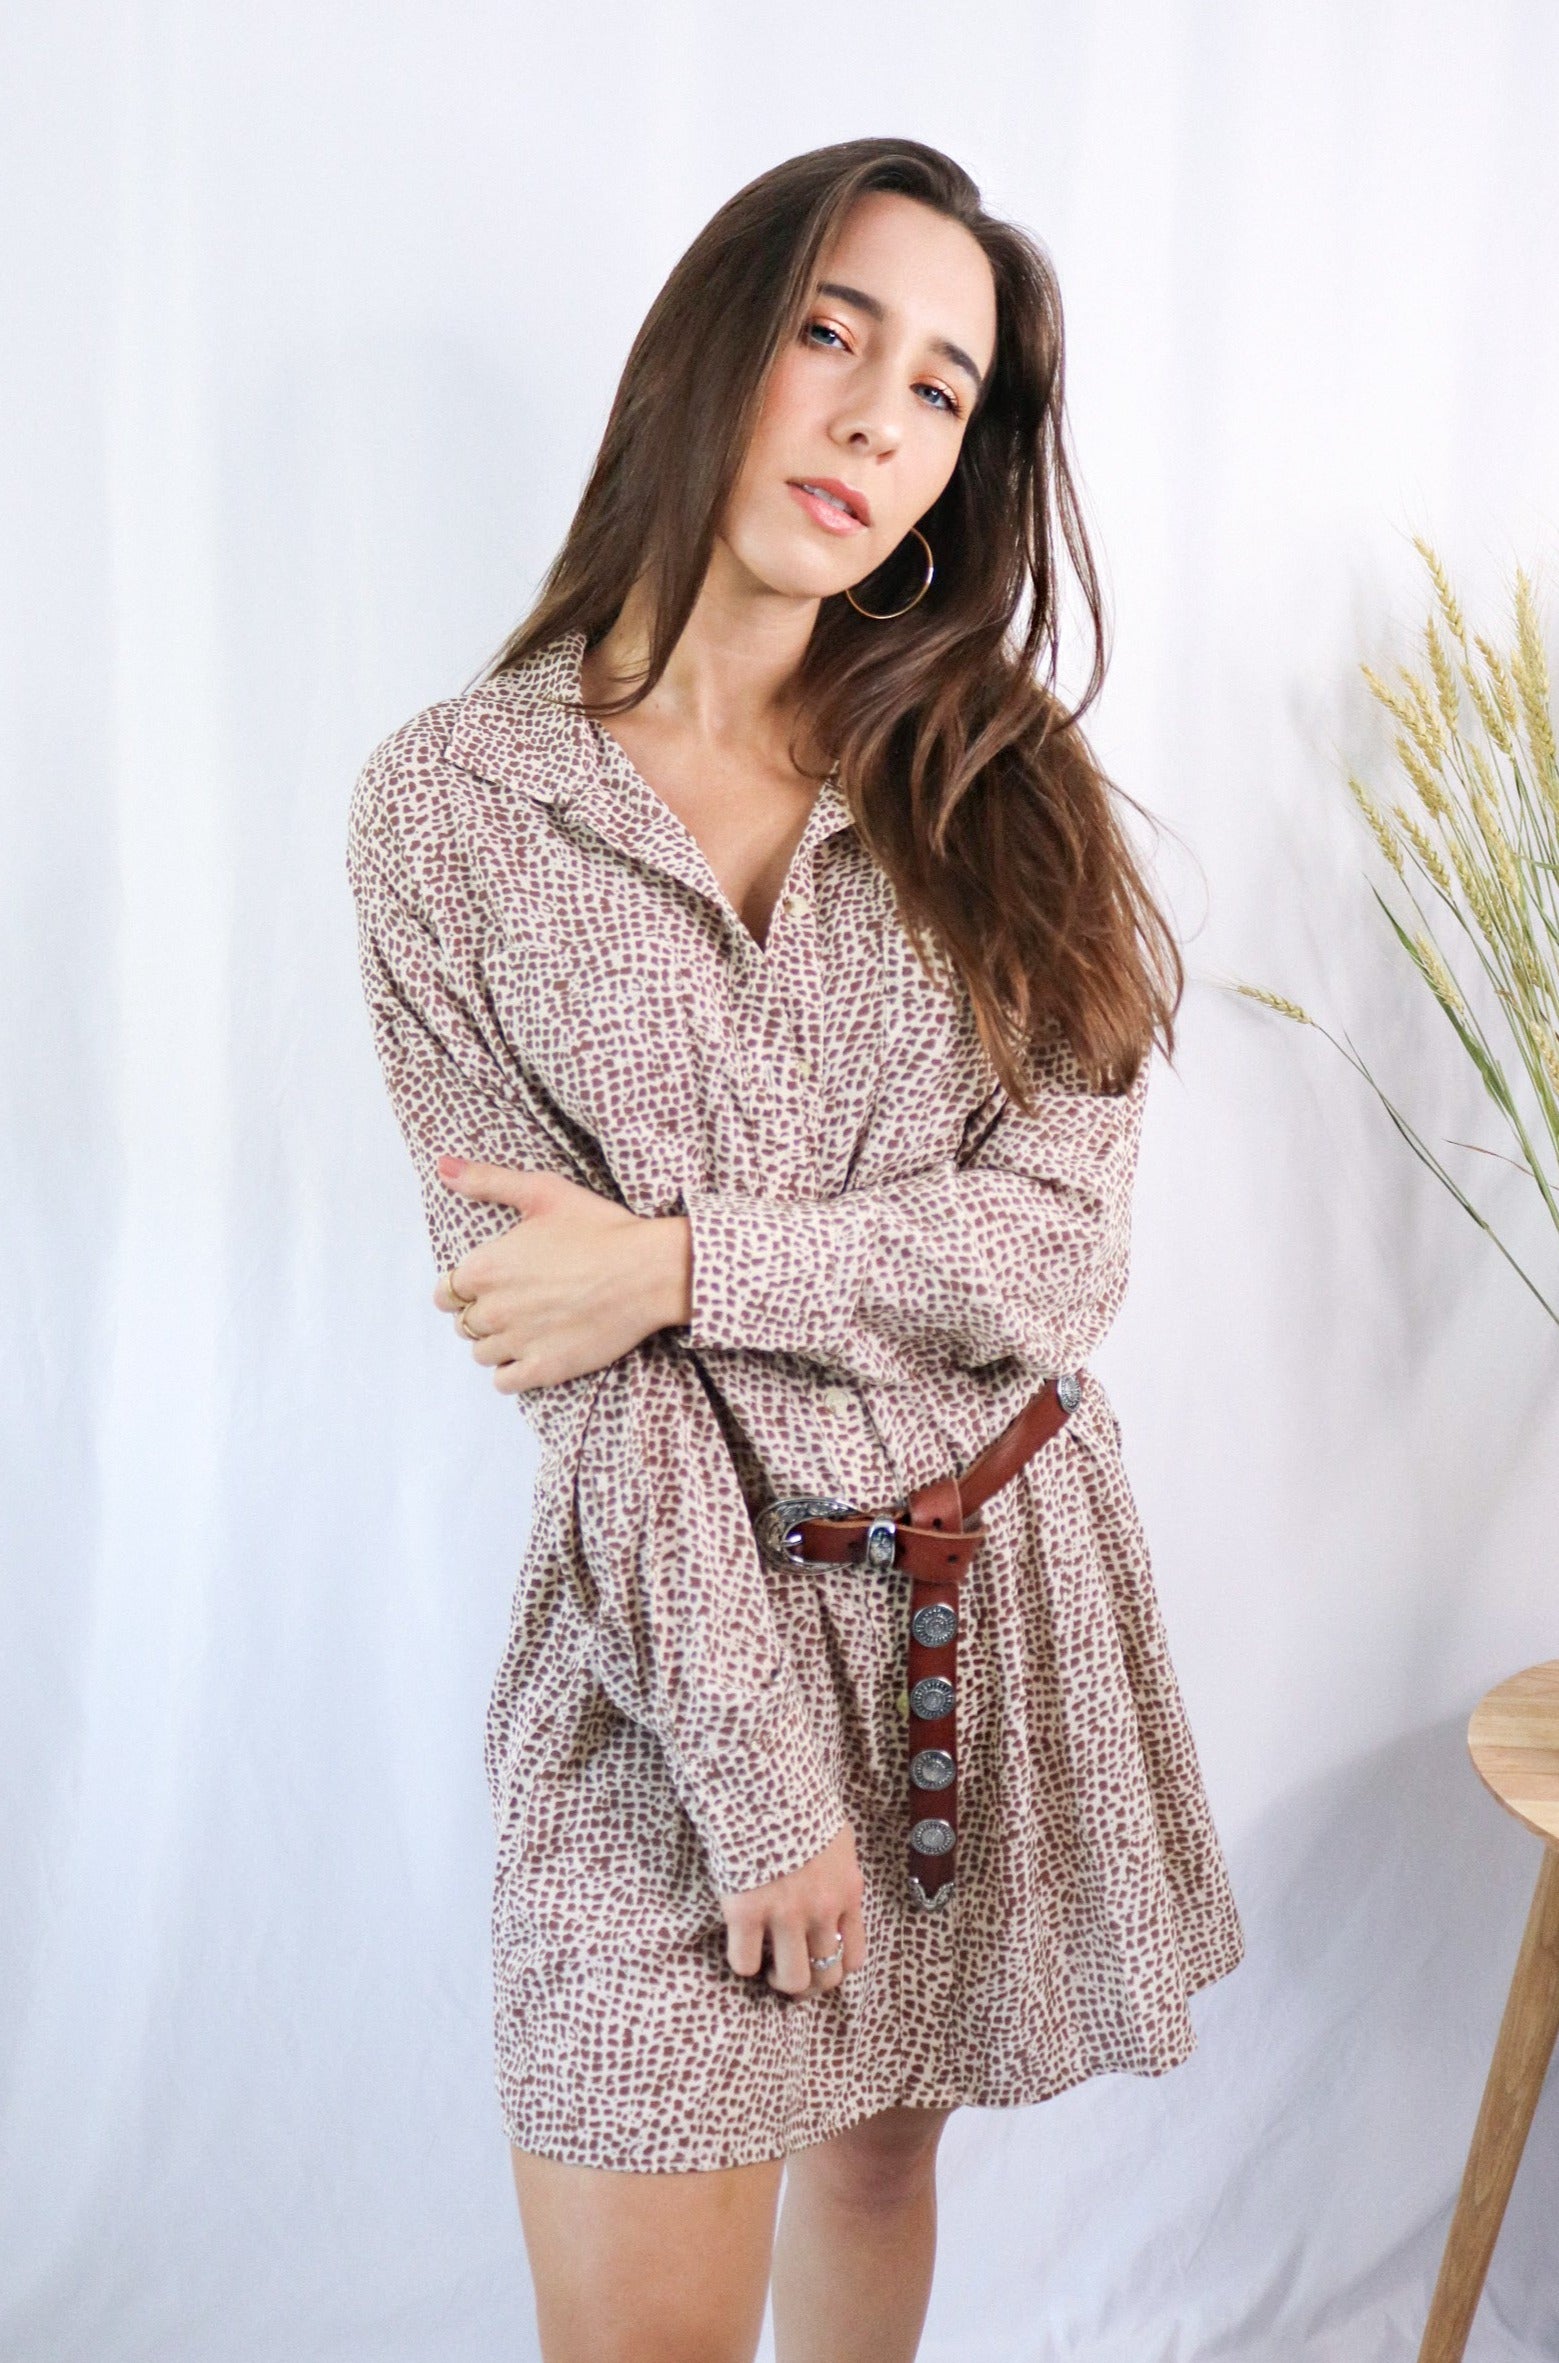 Brunette girl models a collared T-Shirt Dress in Animal Print (cheetah / leopard print). The t-shirt dress is collared, brown, and mid-length. It is a long sleeve t-shirt dress with a loose and comfortable fit and paired with a brown belt.